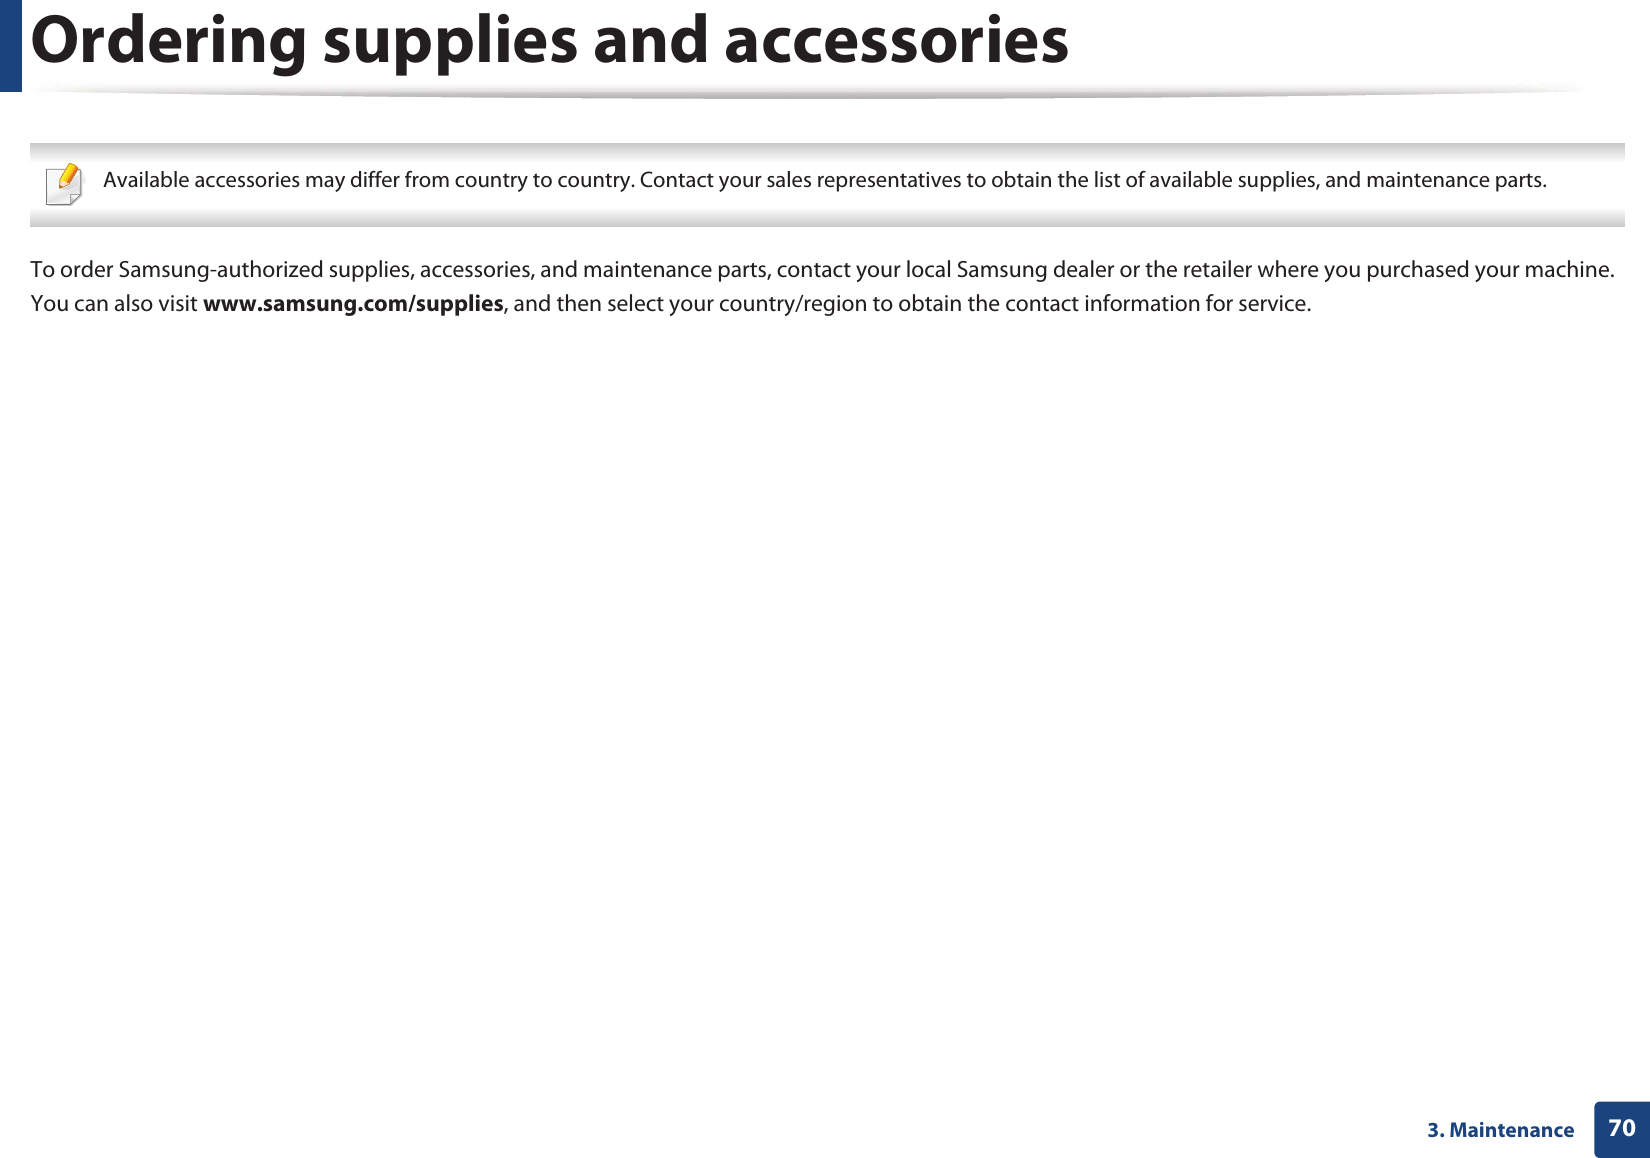 703. MaintenanceOrdering supplies and accessories Available accessories may differ from country to country. Contact your sales representatives to obtain the list of available supplies, and maintenance parts. To order Samsung-authorized supplies, accessories, and maintenance parts, contact your local Samsung dealer or the retailer where you purchased your machine. You can also visit www.samsung.com/supplies, and then select your country/region to obtain the contact information for service.